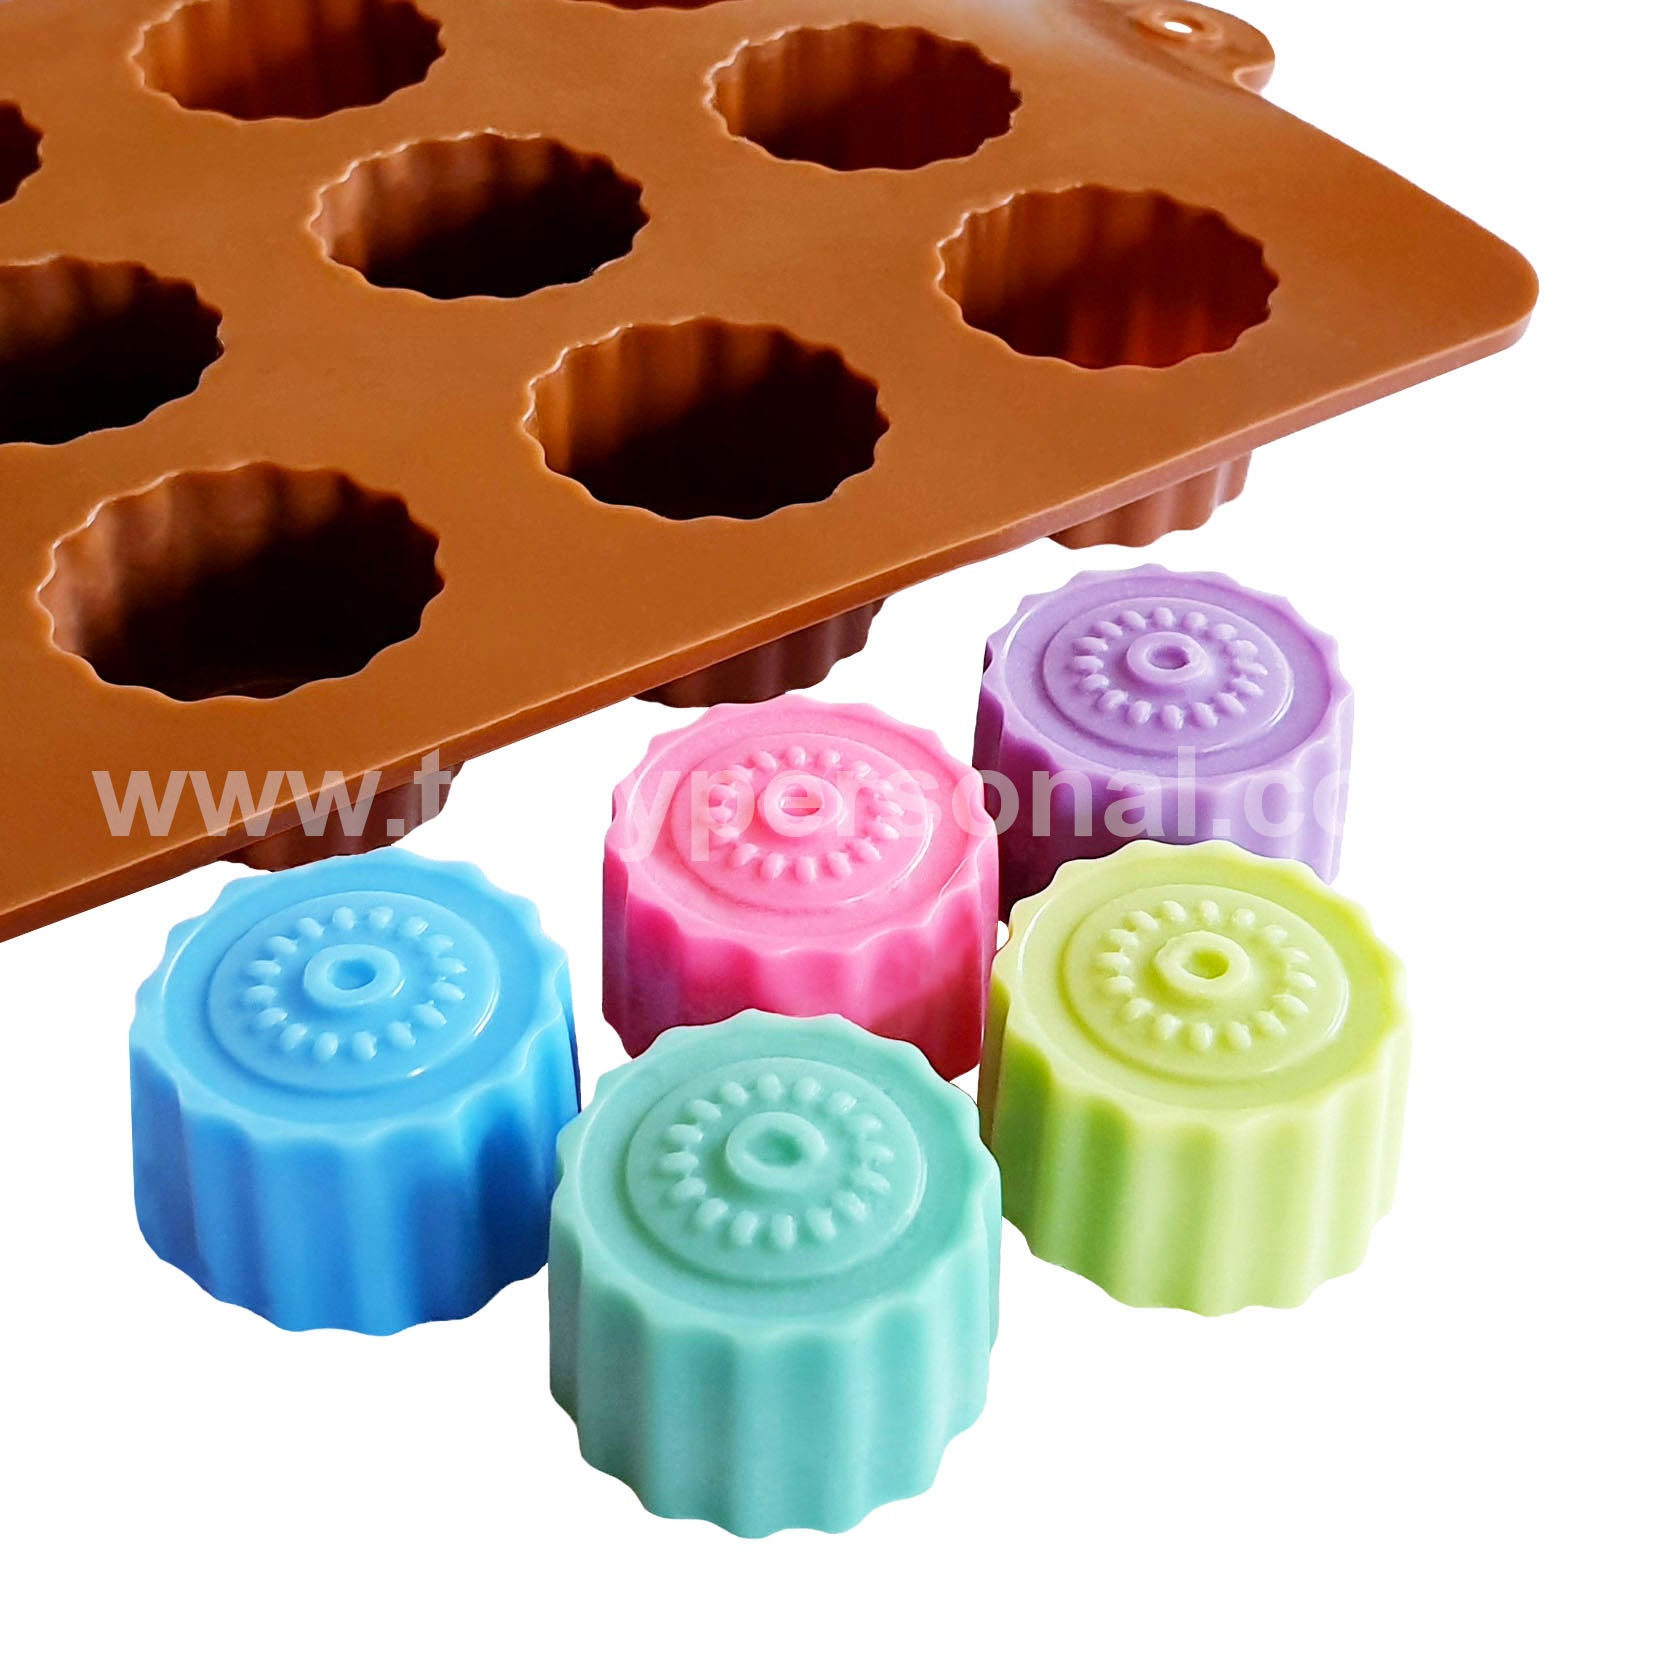 Kaleidoscope Silicone Mould | Wax Melts | Truly Personal Ltd